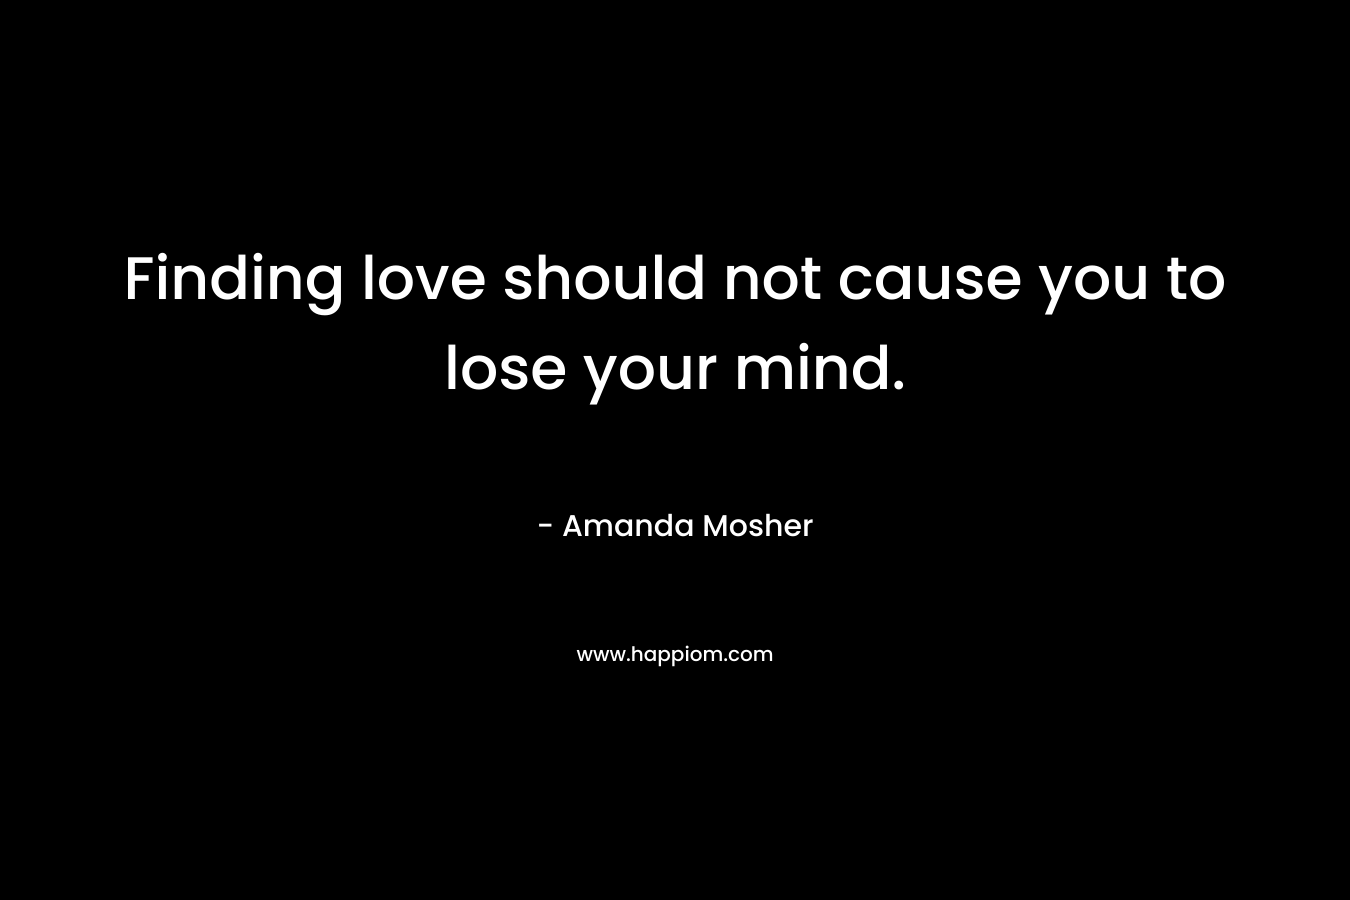 Finding love should not cause you to lose your mind. – Amanda Mosher